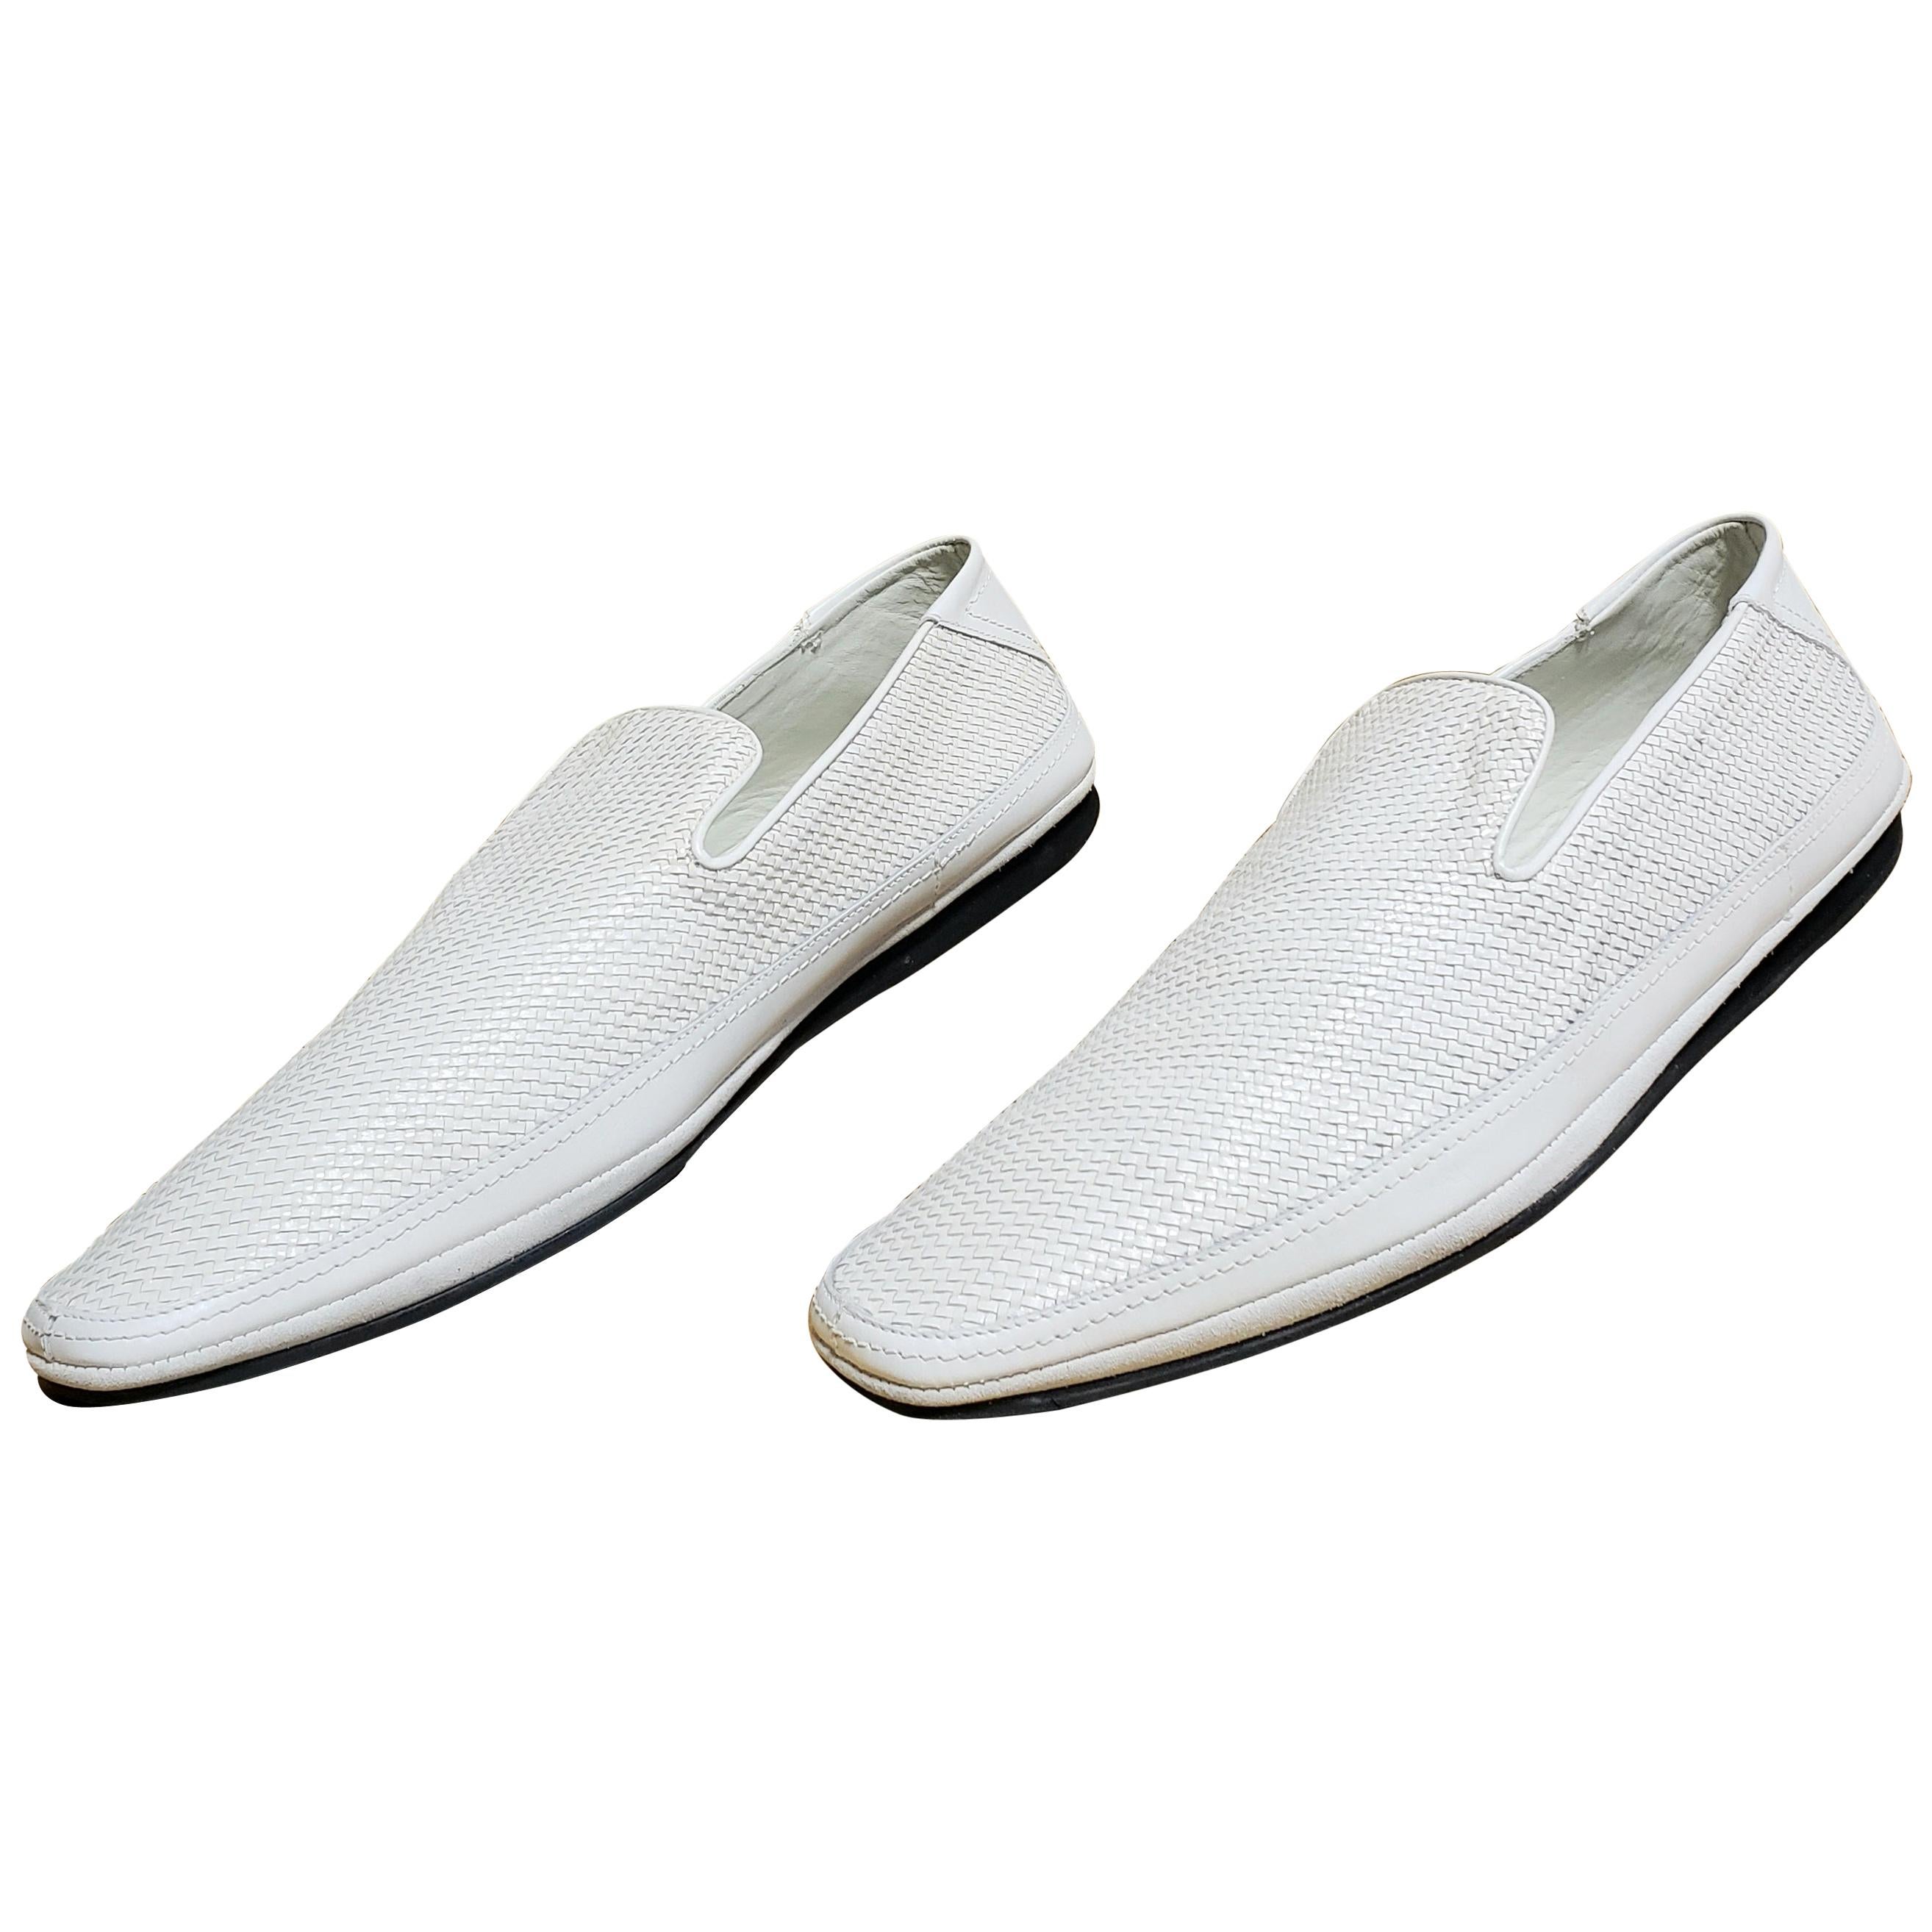 NEW VERSACE WHITE WOVEN LEATHER DRIVER Shoes Sz  44.5 - 11.5, 45 - 12 For Sale